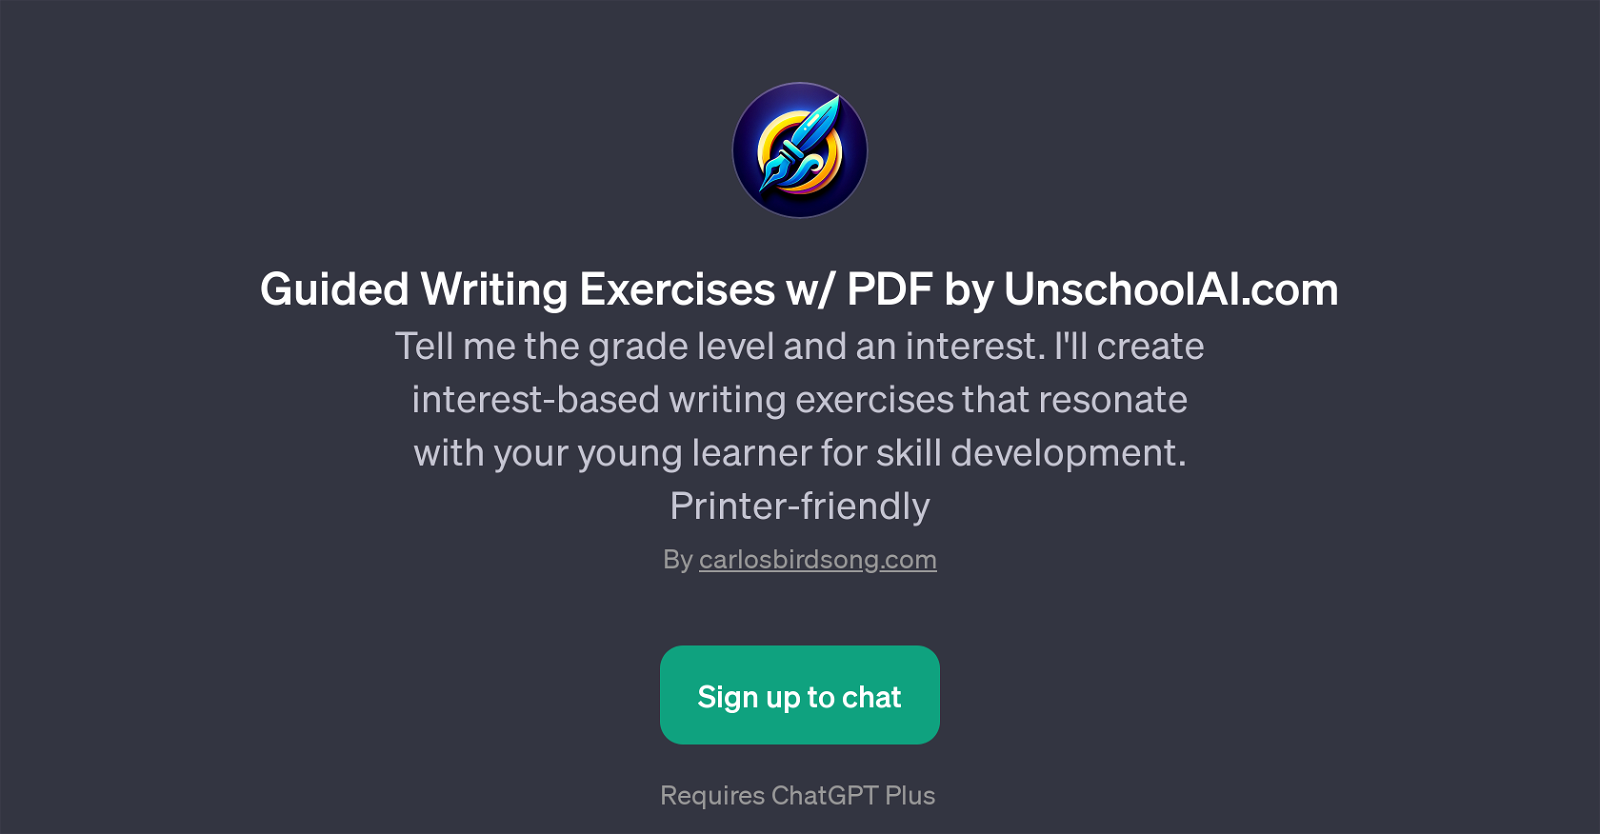 Guided Writing Exercises w/ PDF by UnschoolAI.com website